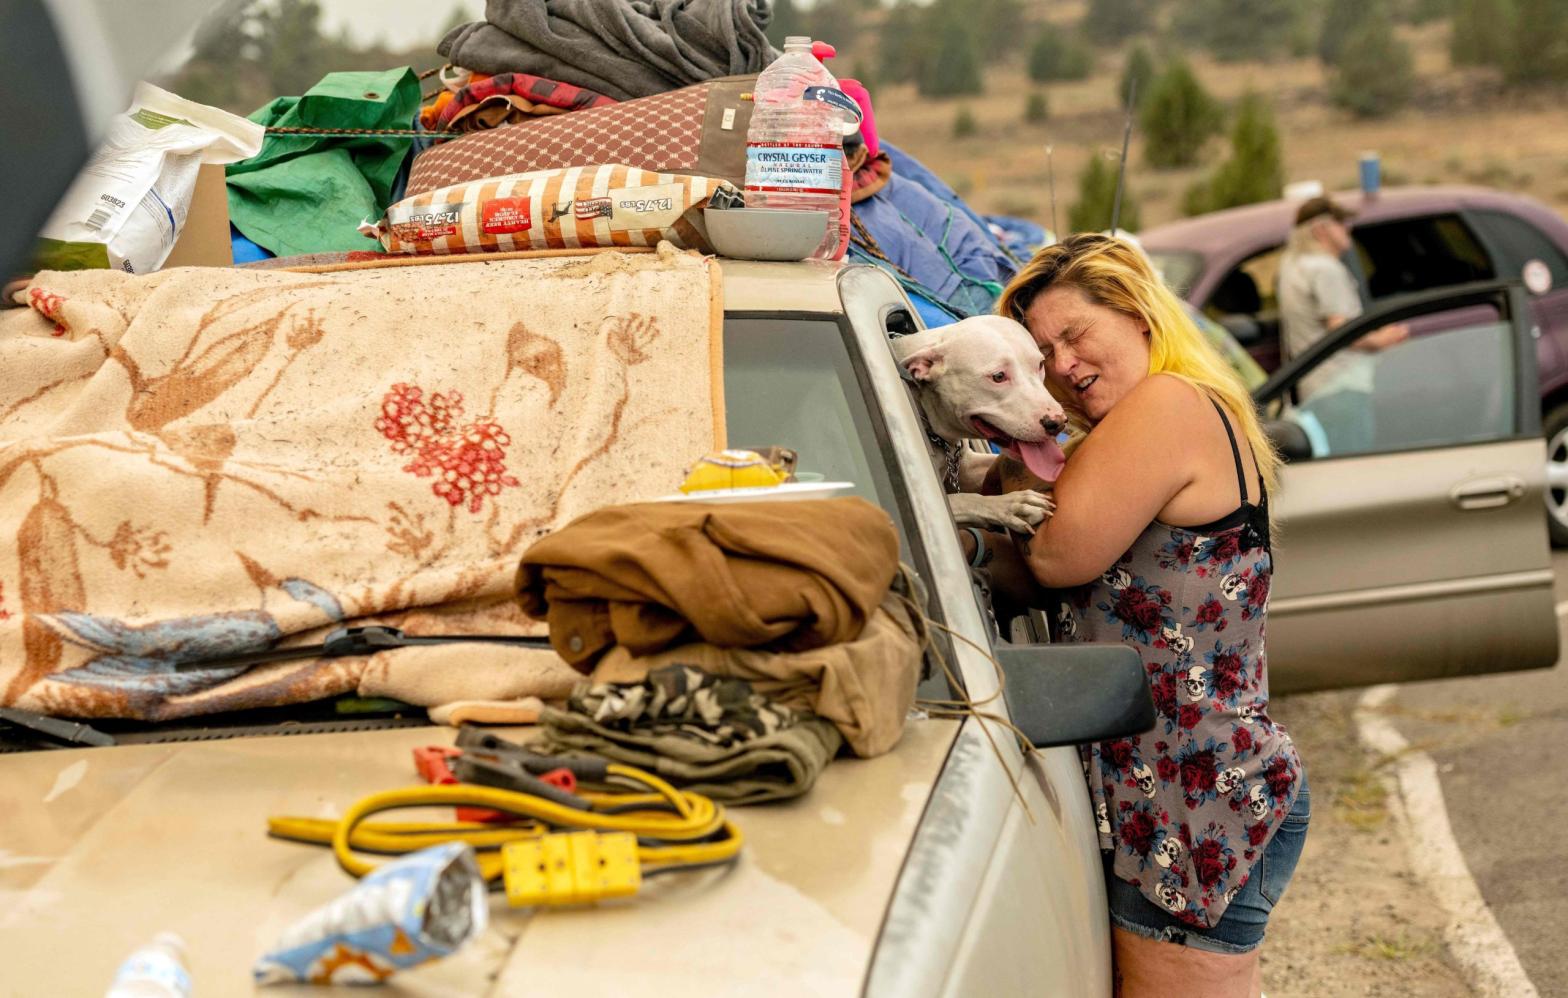 Evacuated Chester resident April Phillips hugs their family dog at an evacuation centre for the Dixie fire in Susanville, California, on Aug. 6, 2021. (Photo: Josh Edelson/AFP, Getty Images)